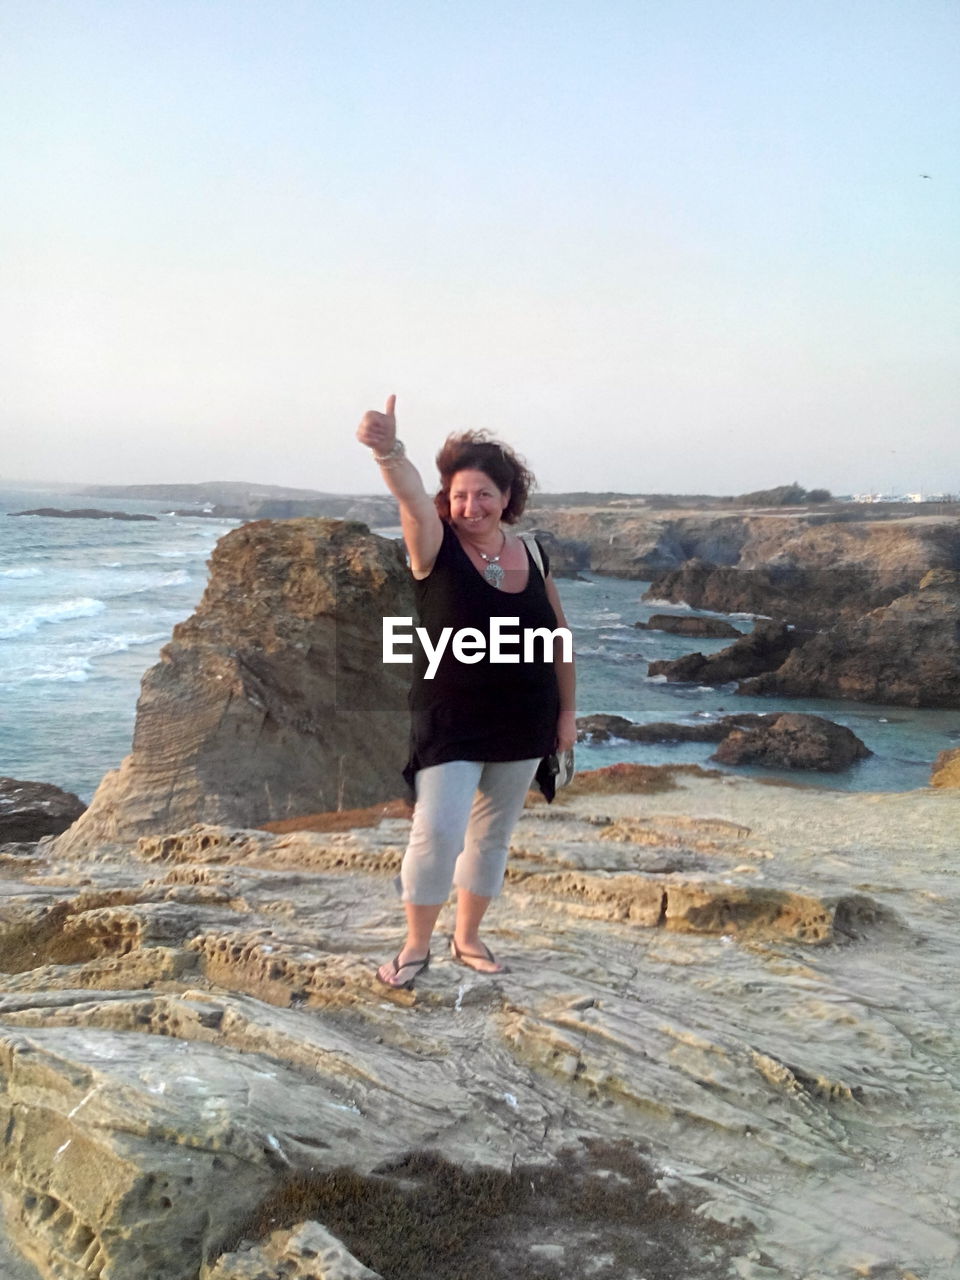 Portrait of woman showing thumbs up while standing on rock formation by sea against clear sky